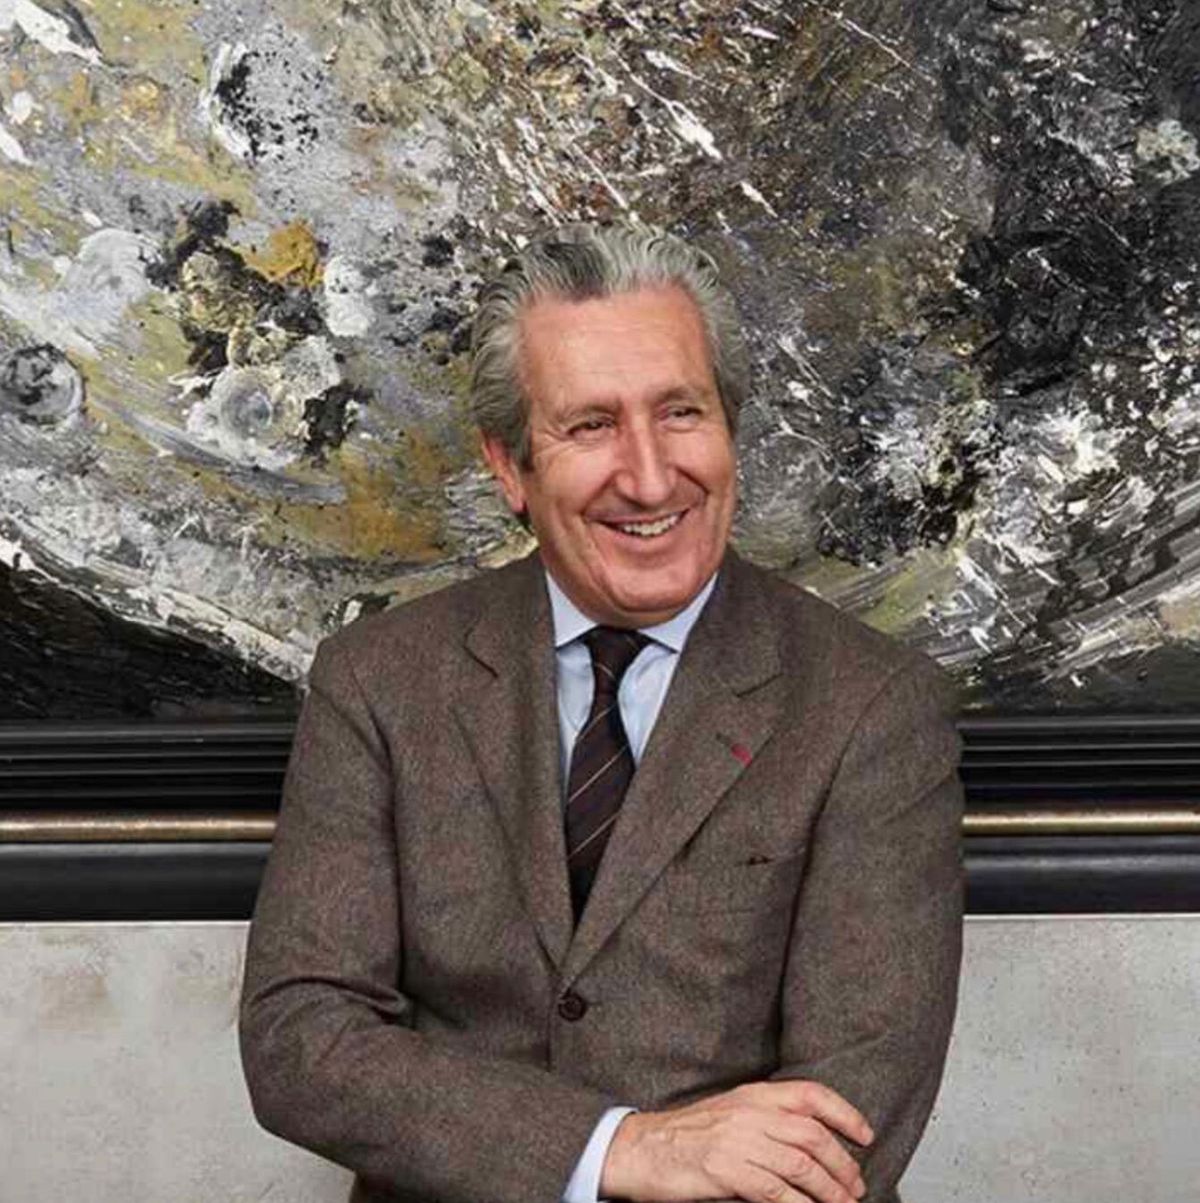 Renowned Architect and Designer Thierry Despont Has Died